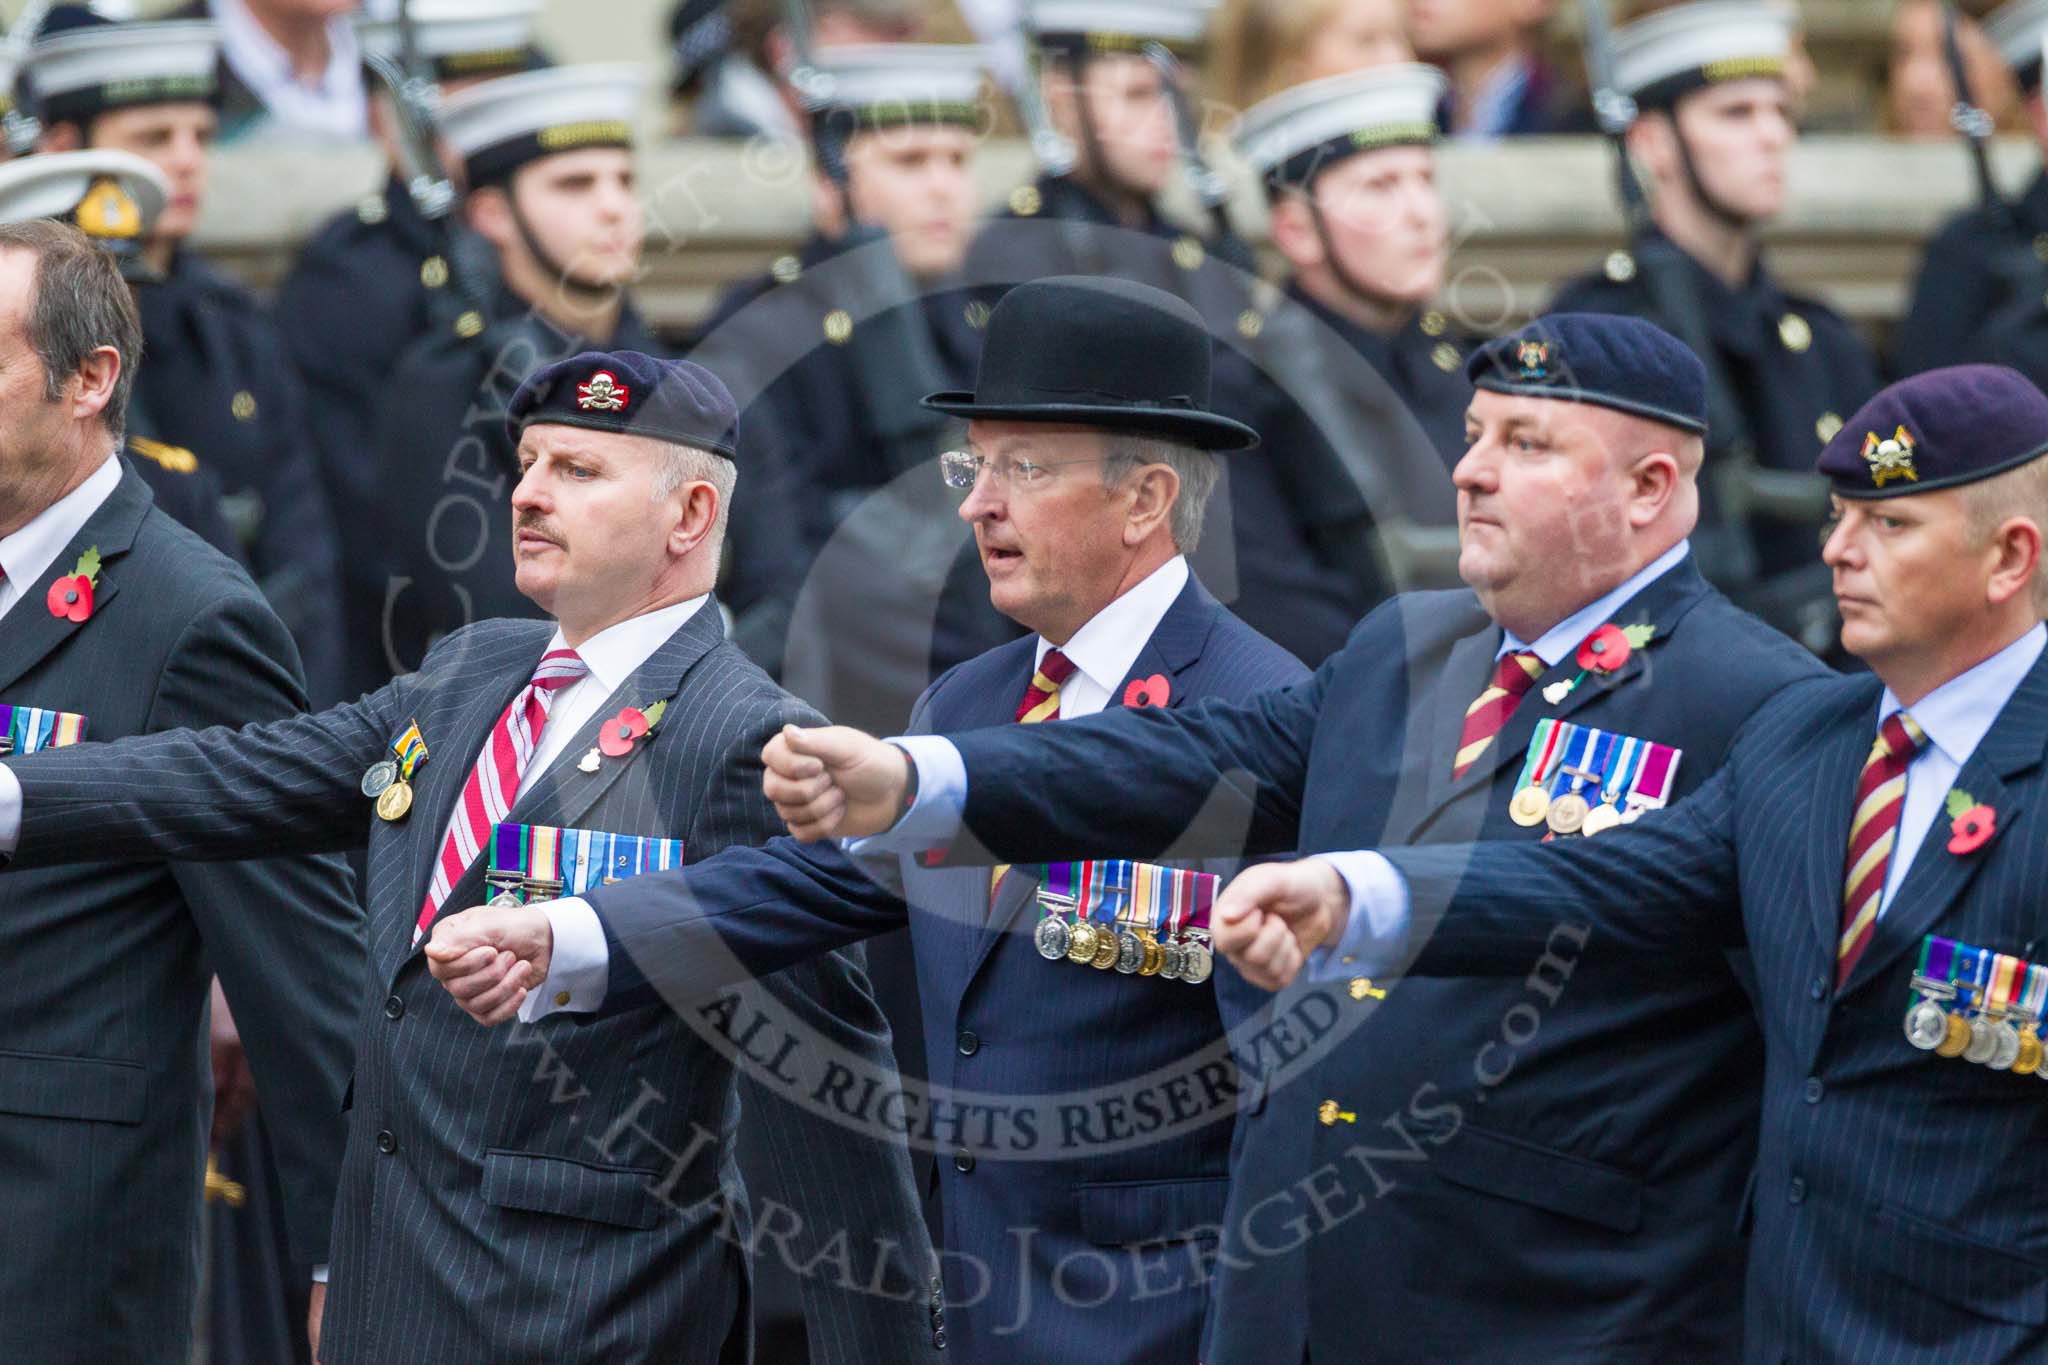 Remembrance Sunday at the Cenotaph 2015: Group B28, The Royal Lancers (New for 2015).
Cenotaph, Whitehall, London SW1,
London,
Greater London,
United Kingdom,
on 08 November 2015 at 11:42, image #222